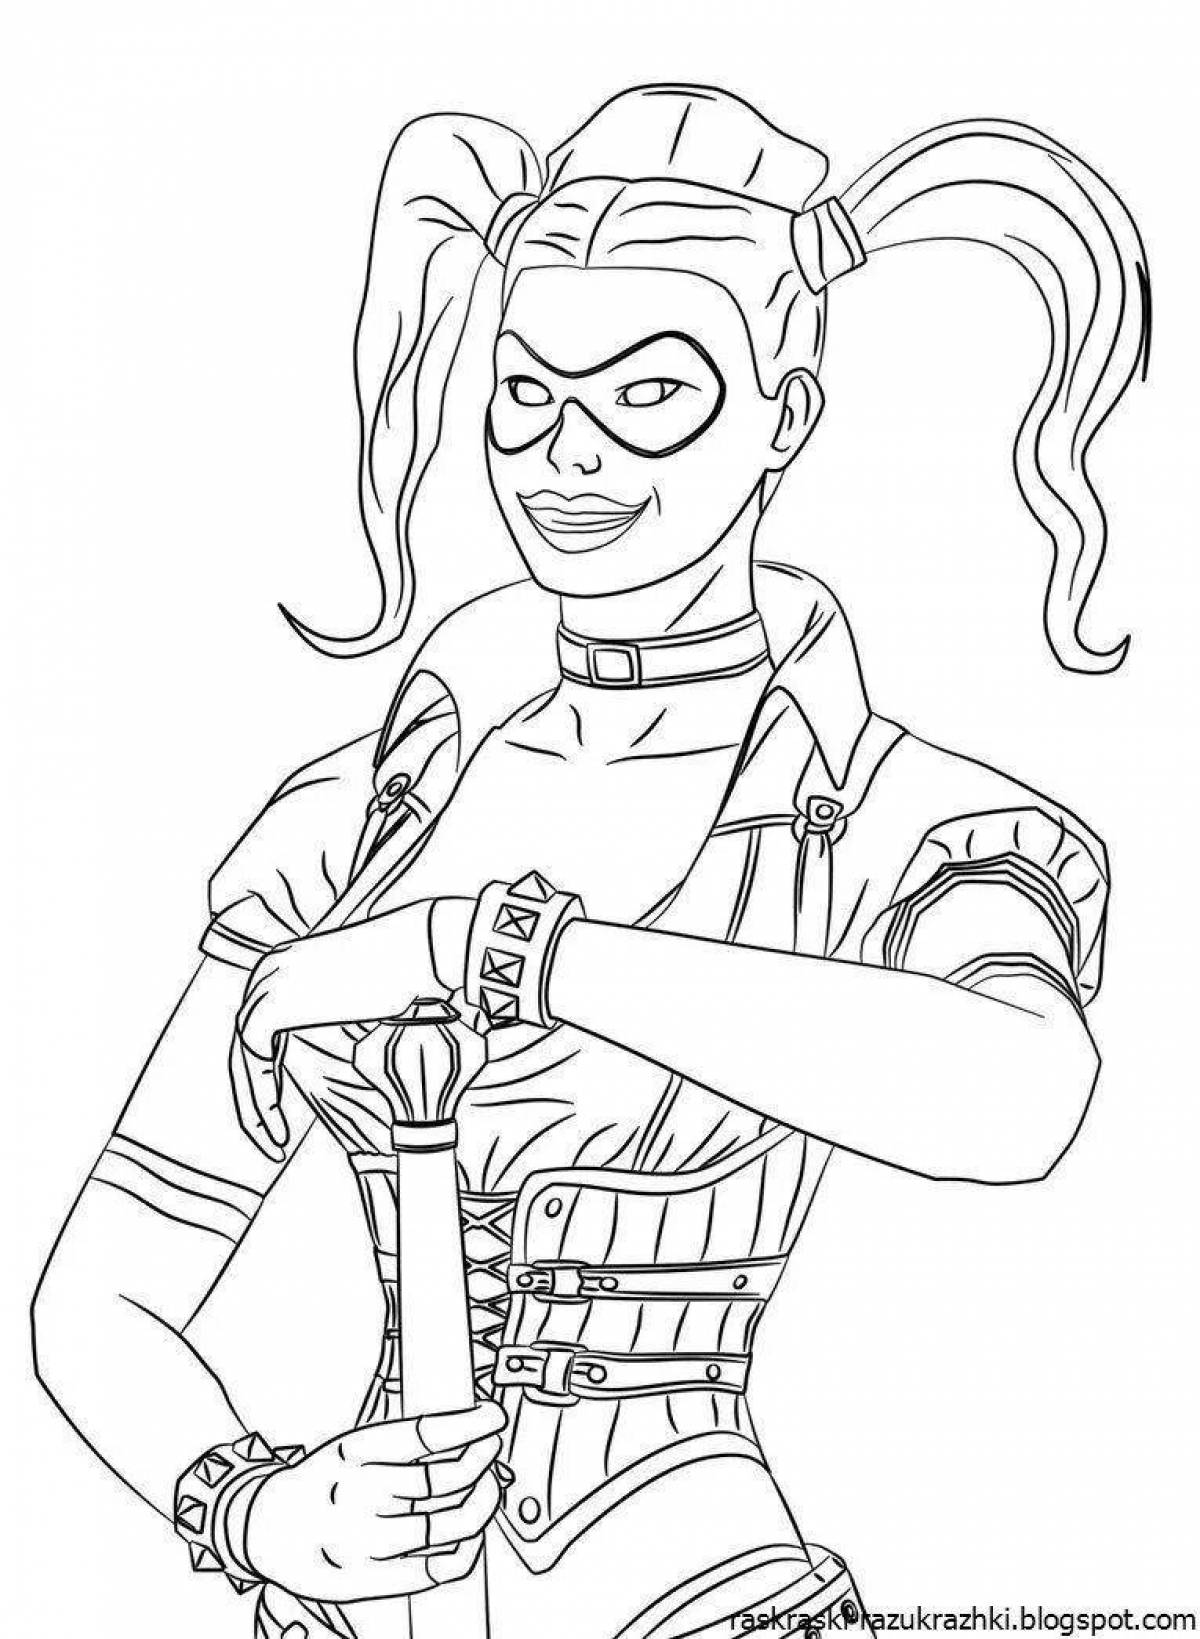 Charming harley quinn coloring book for girls